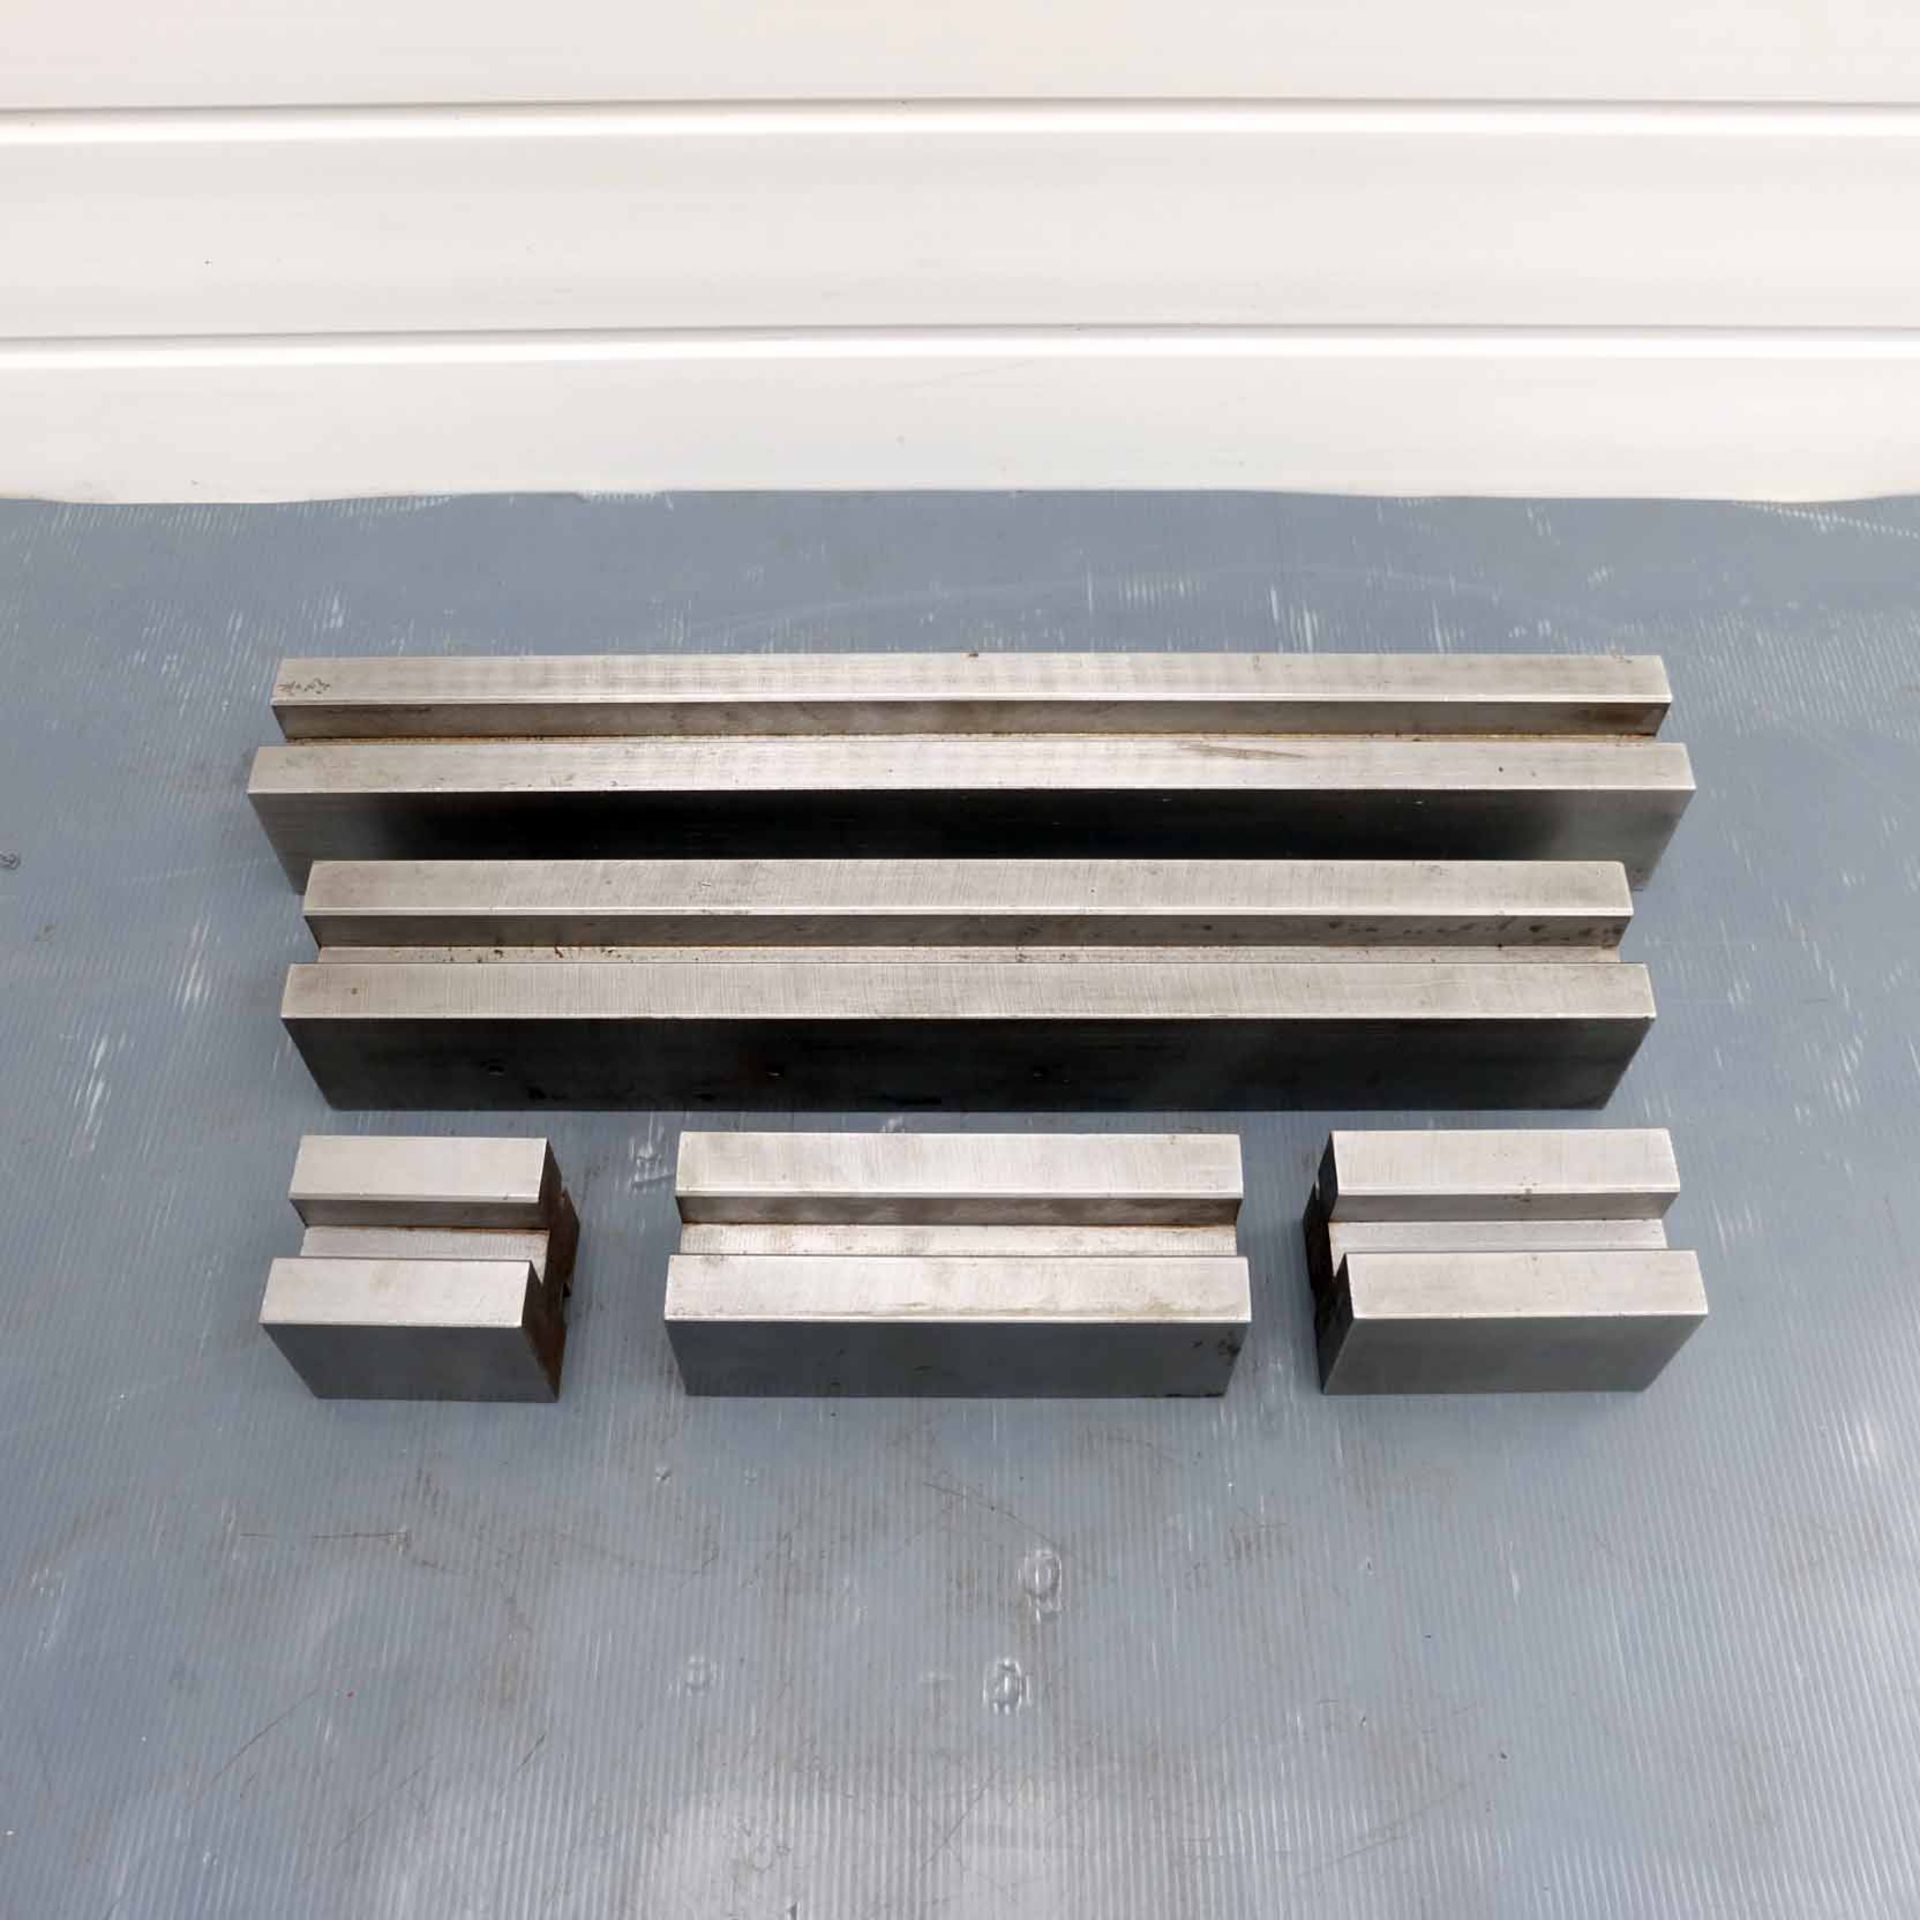 60mm Square Bottom Press Brake Tooling. With 3 Grooves: 6mm, 10mm, 18mm. Lengths 75mm, 100mm, 166mm, - Image 4 of 8